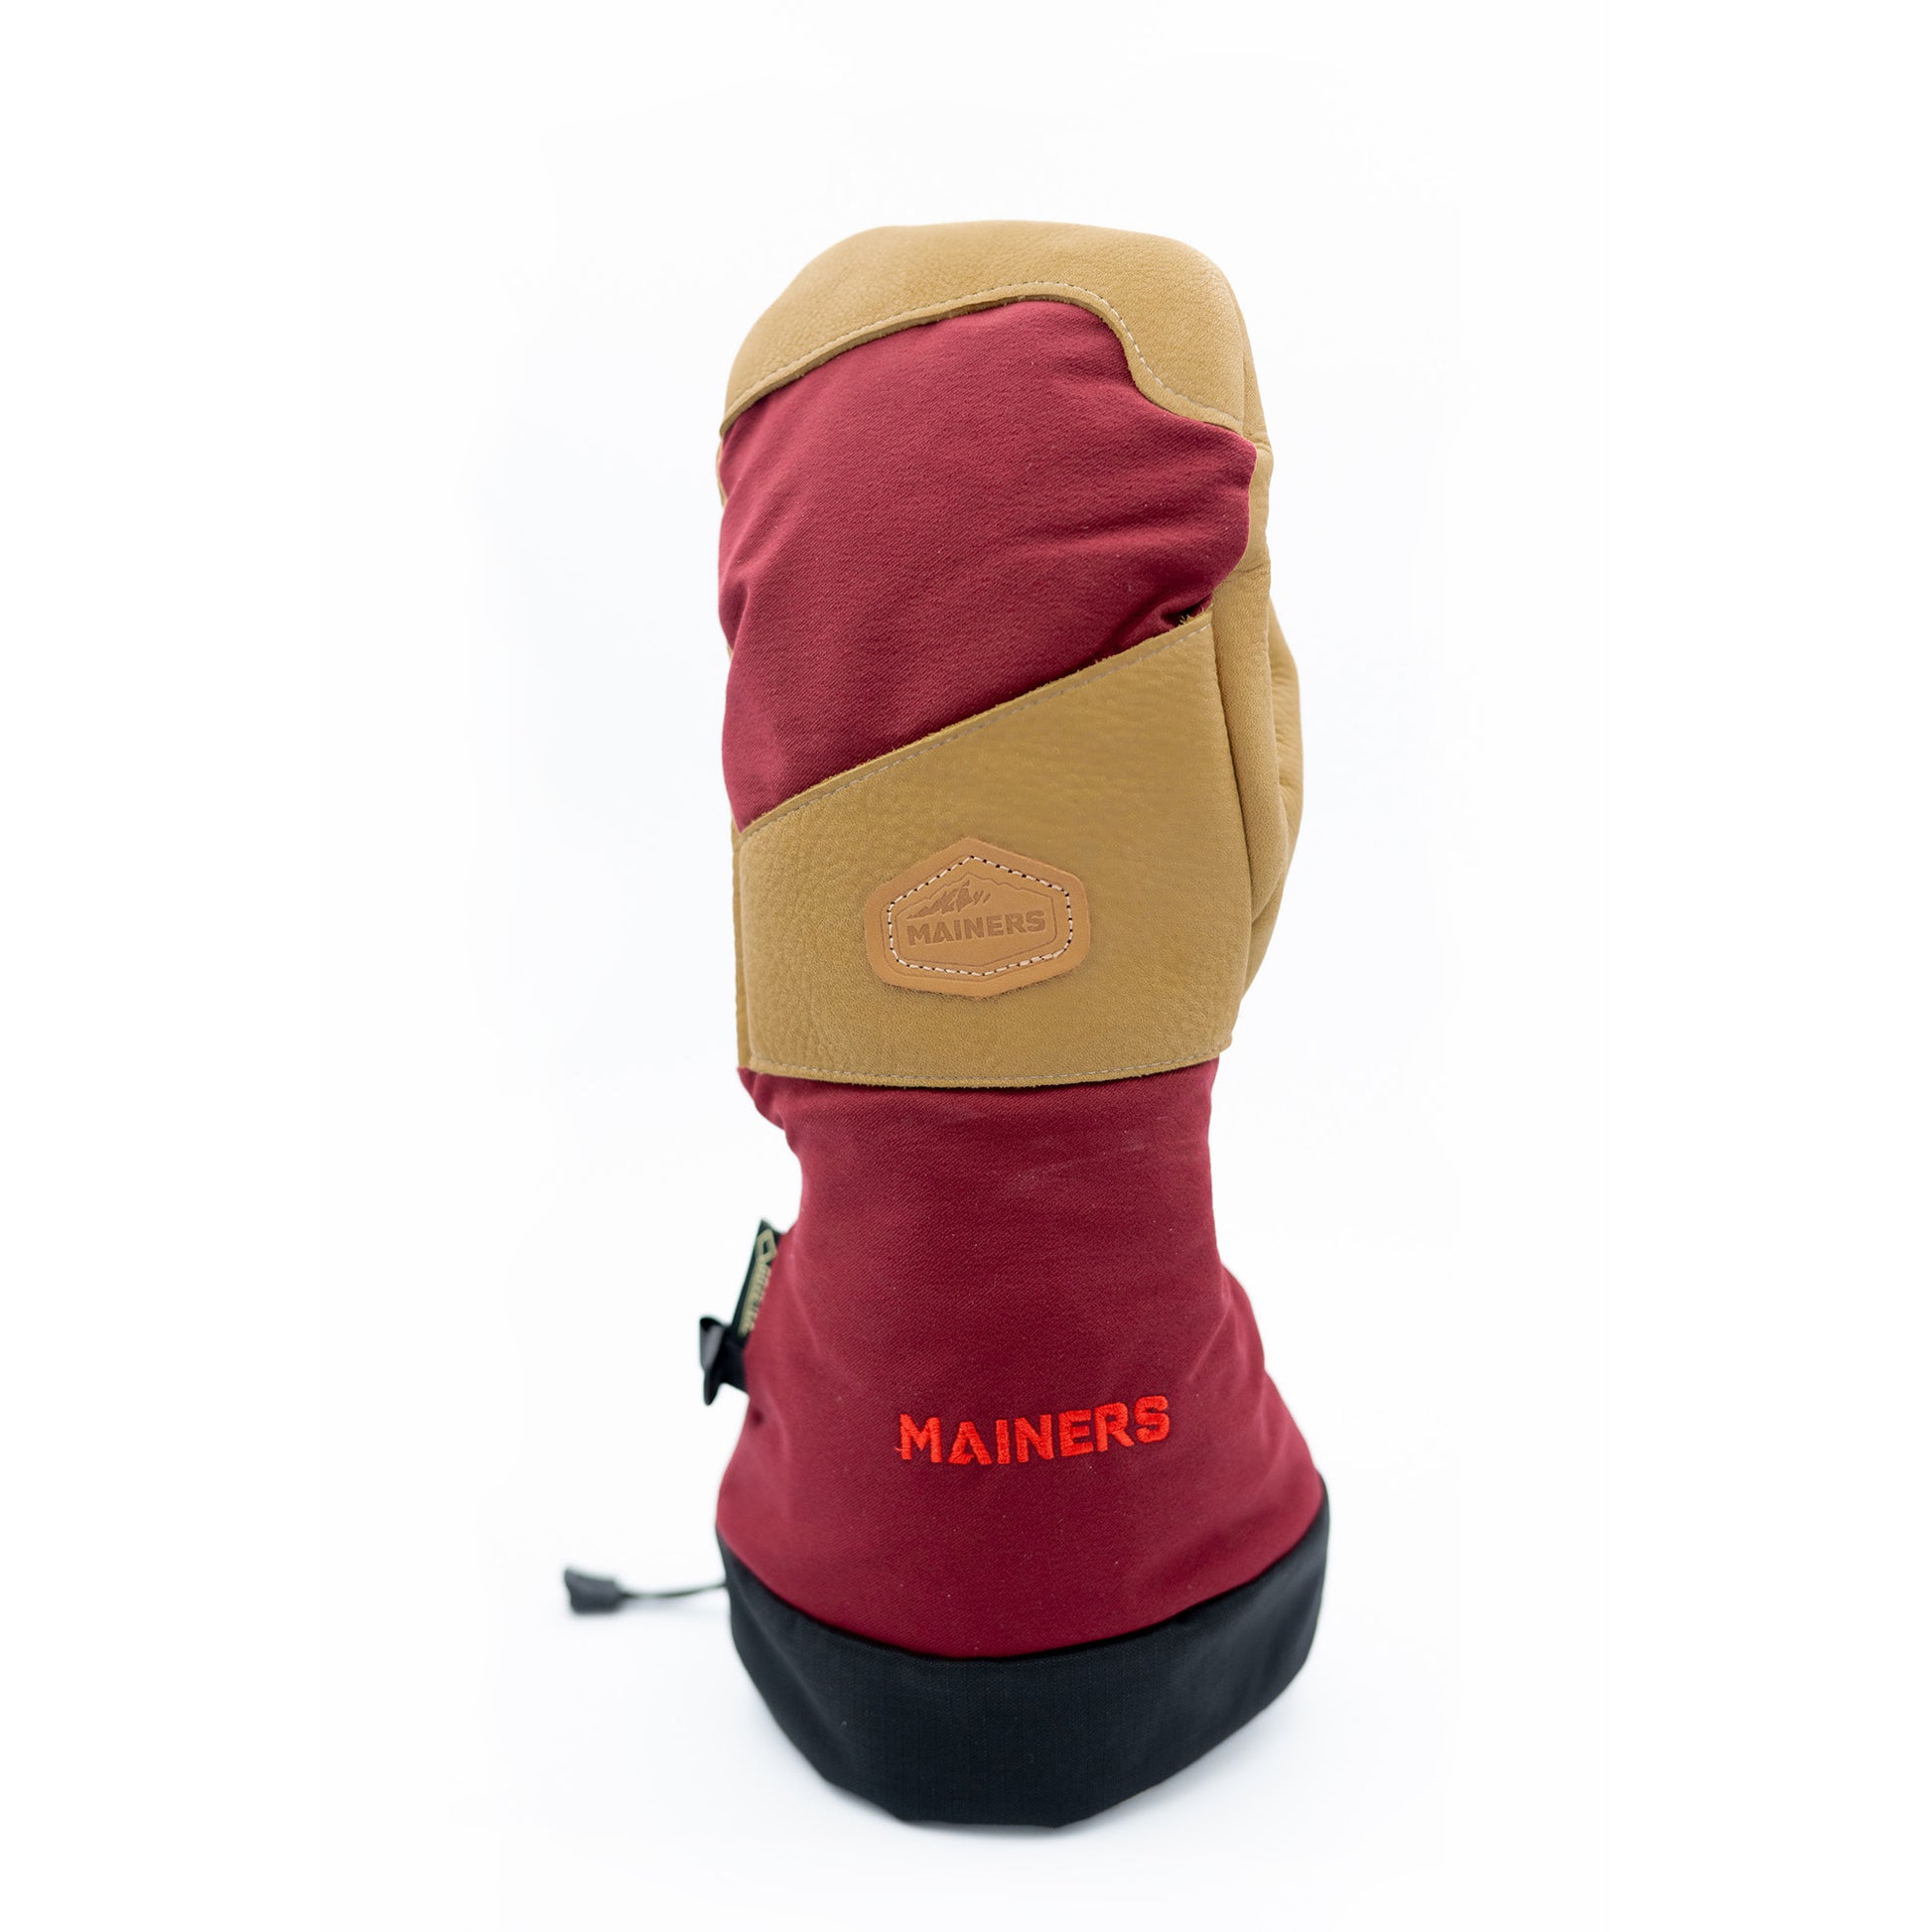 A red and tan Mainers Mitts with the word manida on it, known for its durability.